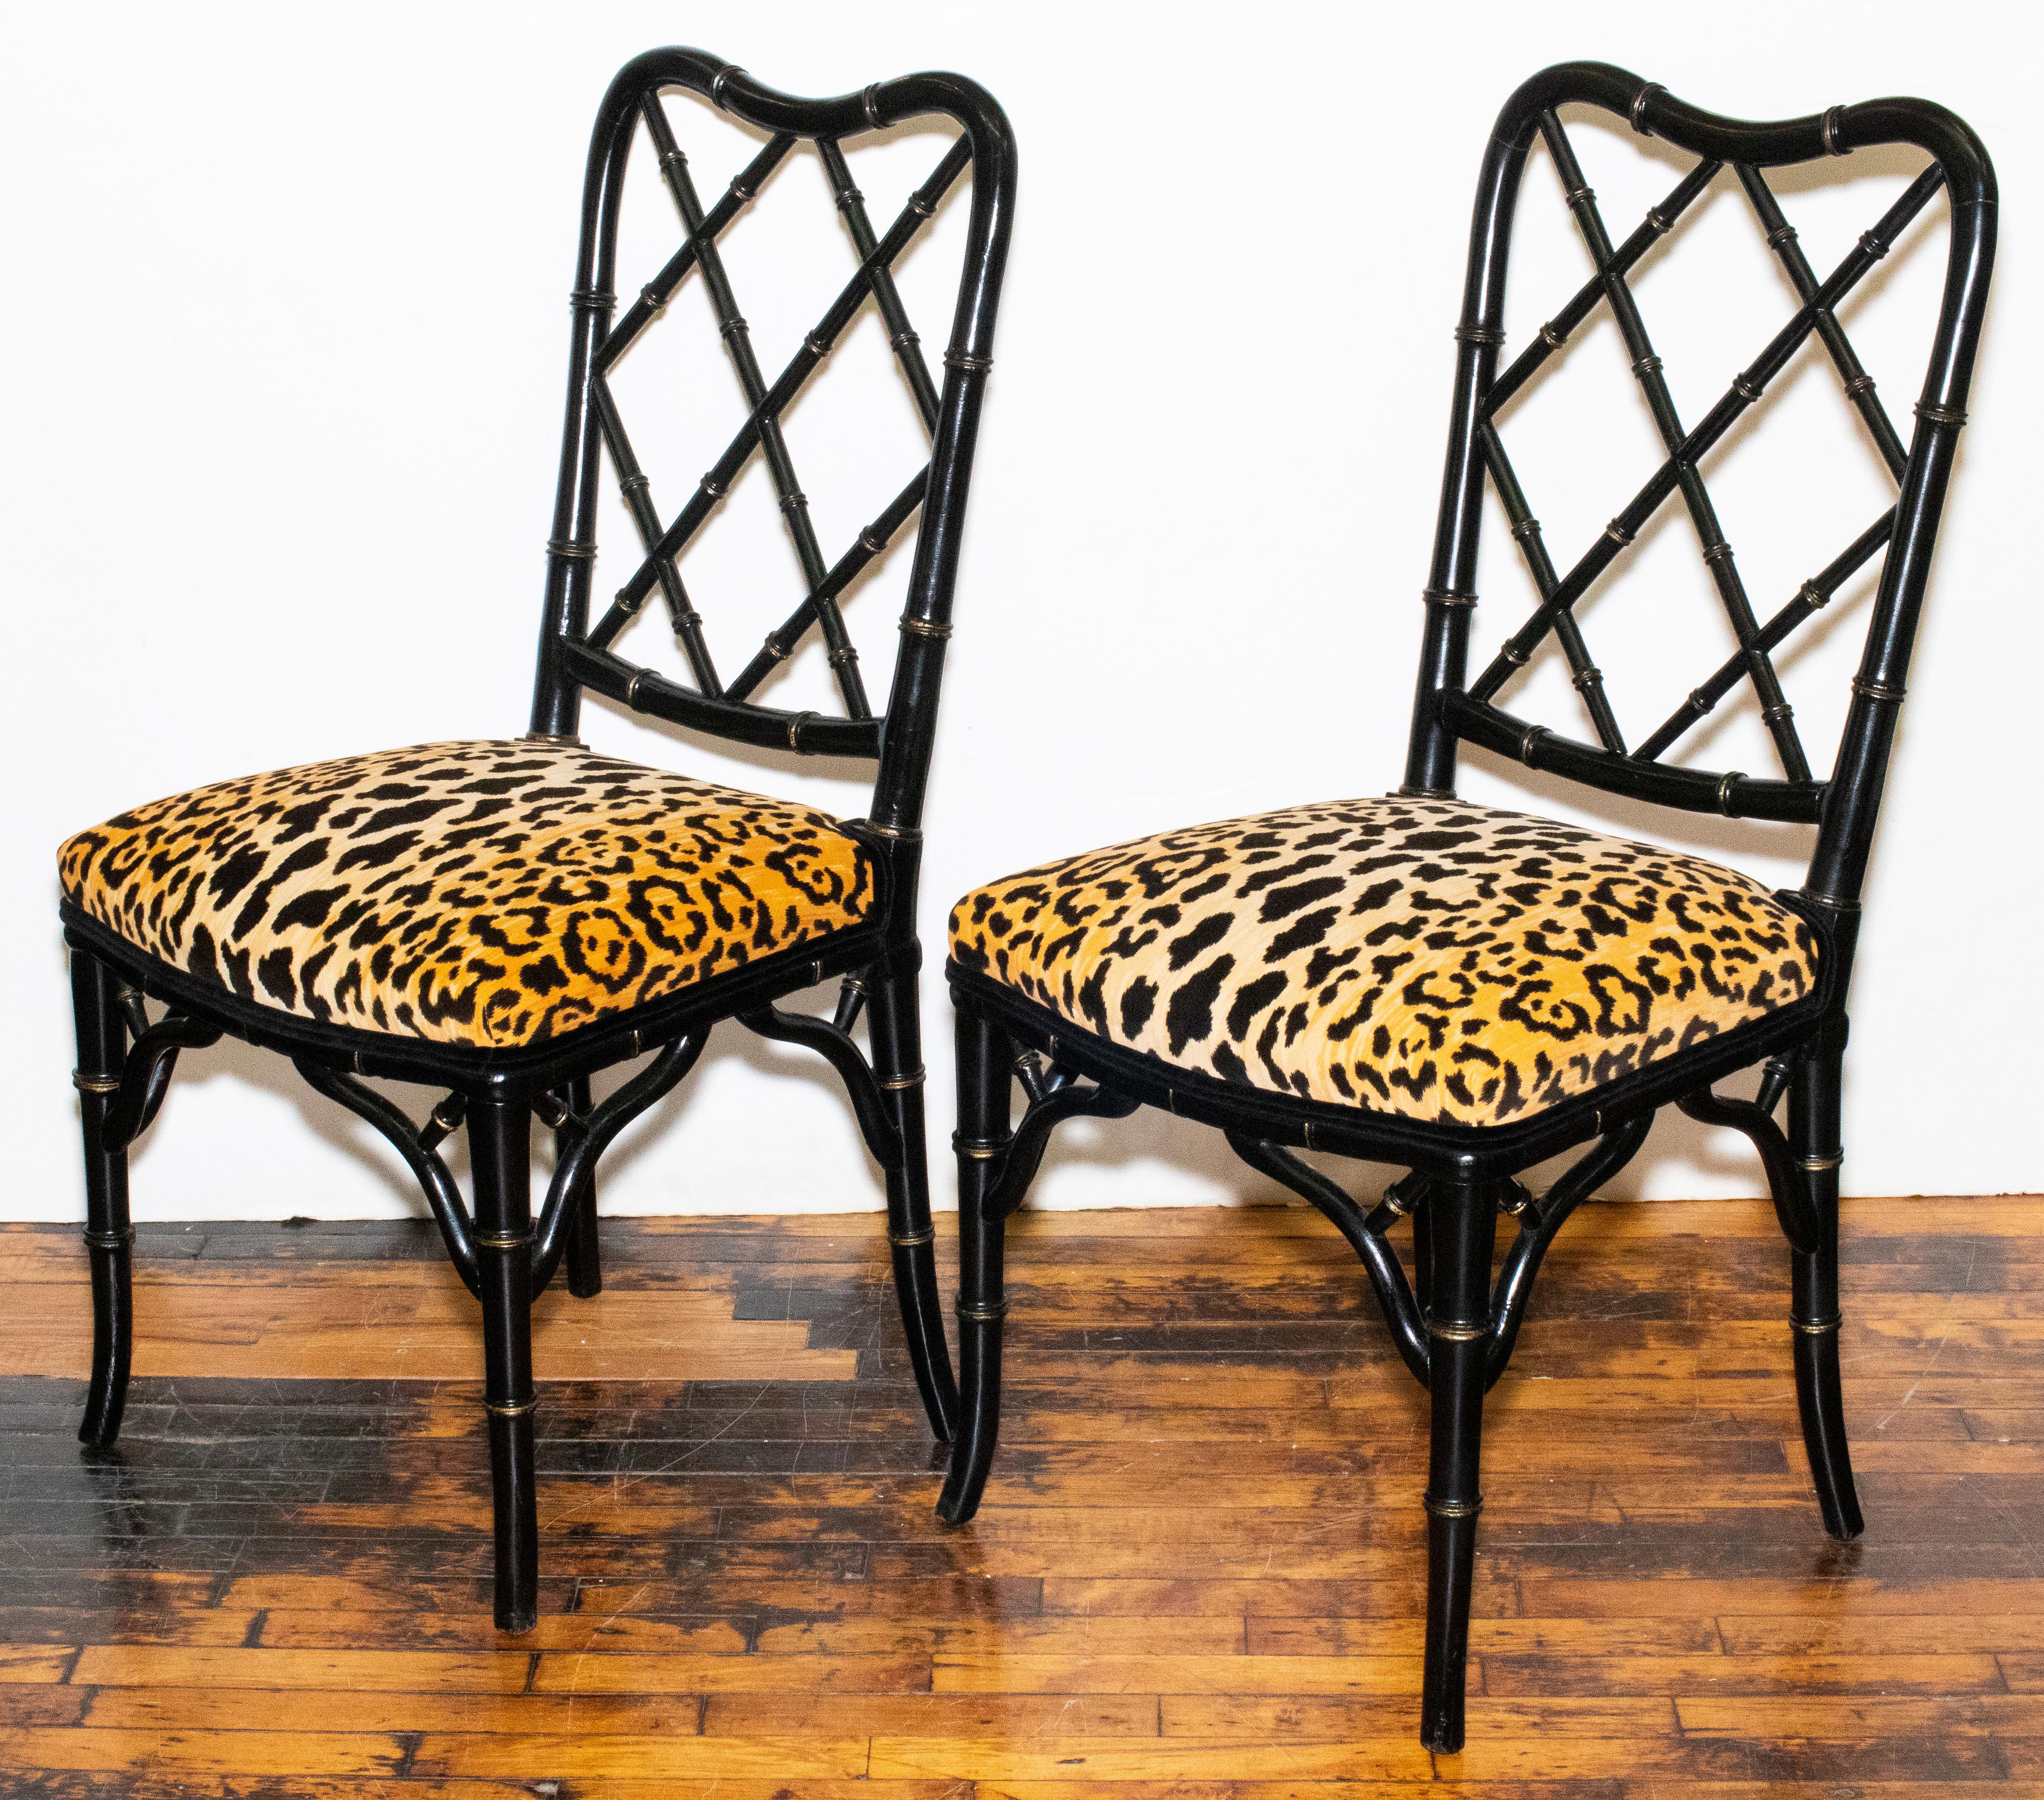 Chinese Chippendale Faux Bamboo Chairs in Leopard Upholstery